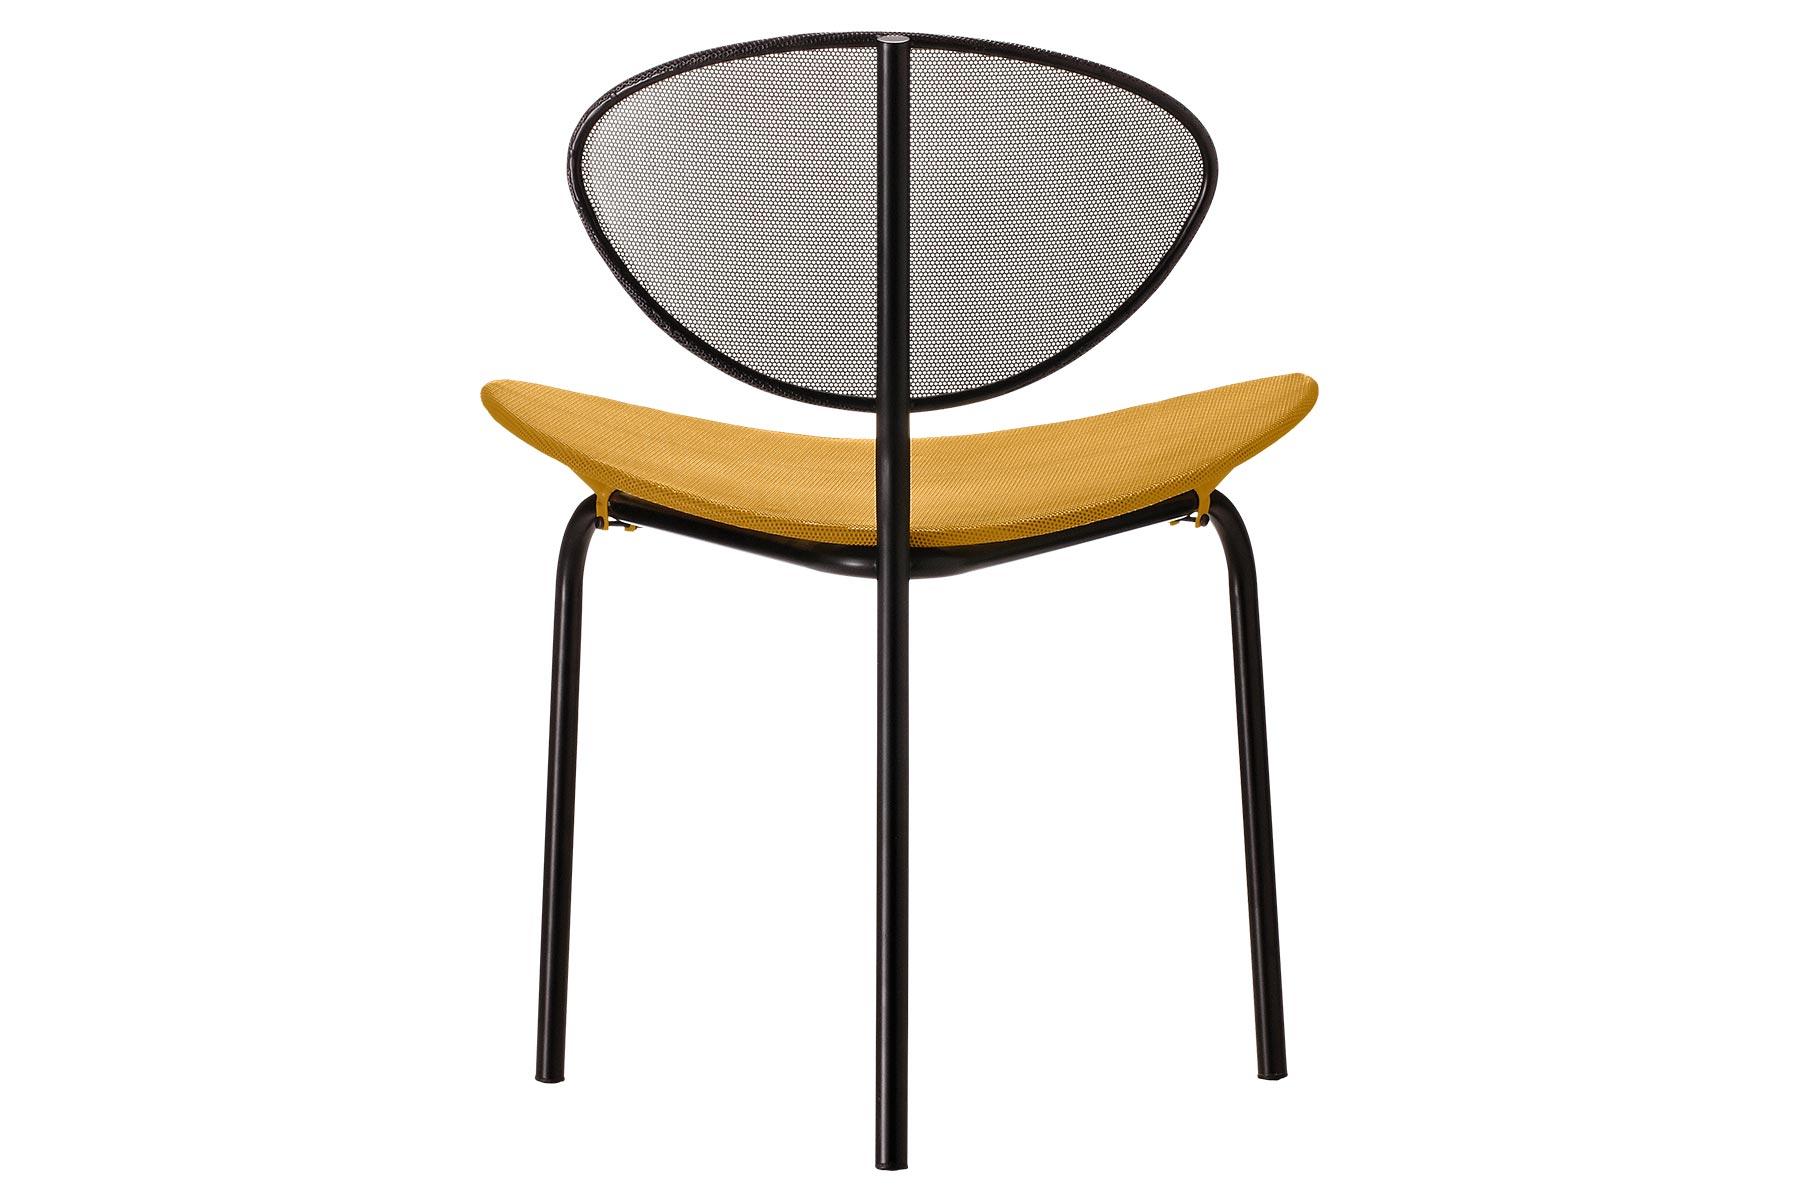 The Nagasaki chair is designed in 1954 and is still Mathieu Matégot’s best-known piece. It was exhibited for the first time at the 1954 Salon des Artistes Décorateurs and, along with Arne Jacobsen’s Ant chair (1952), is one of only a few